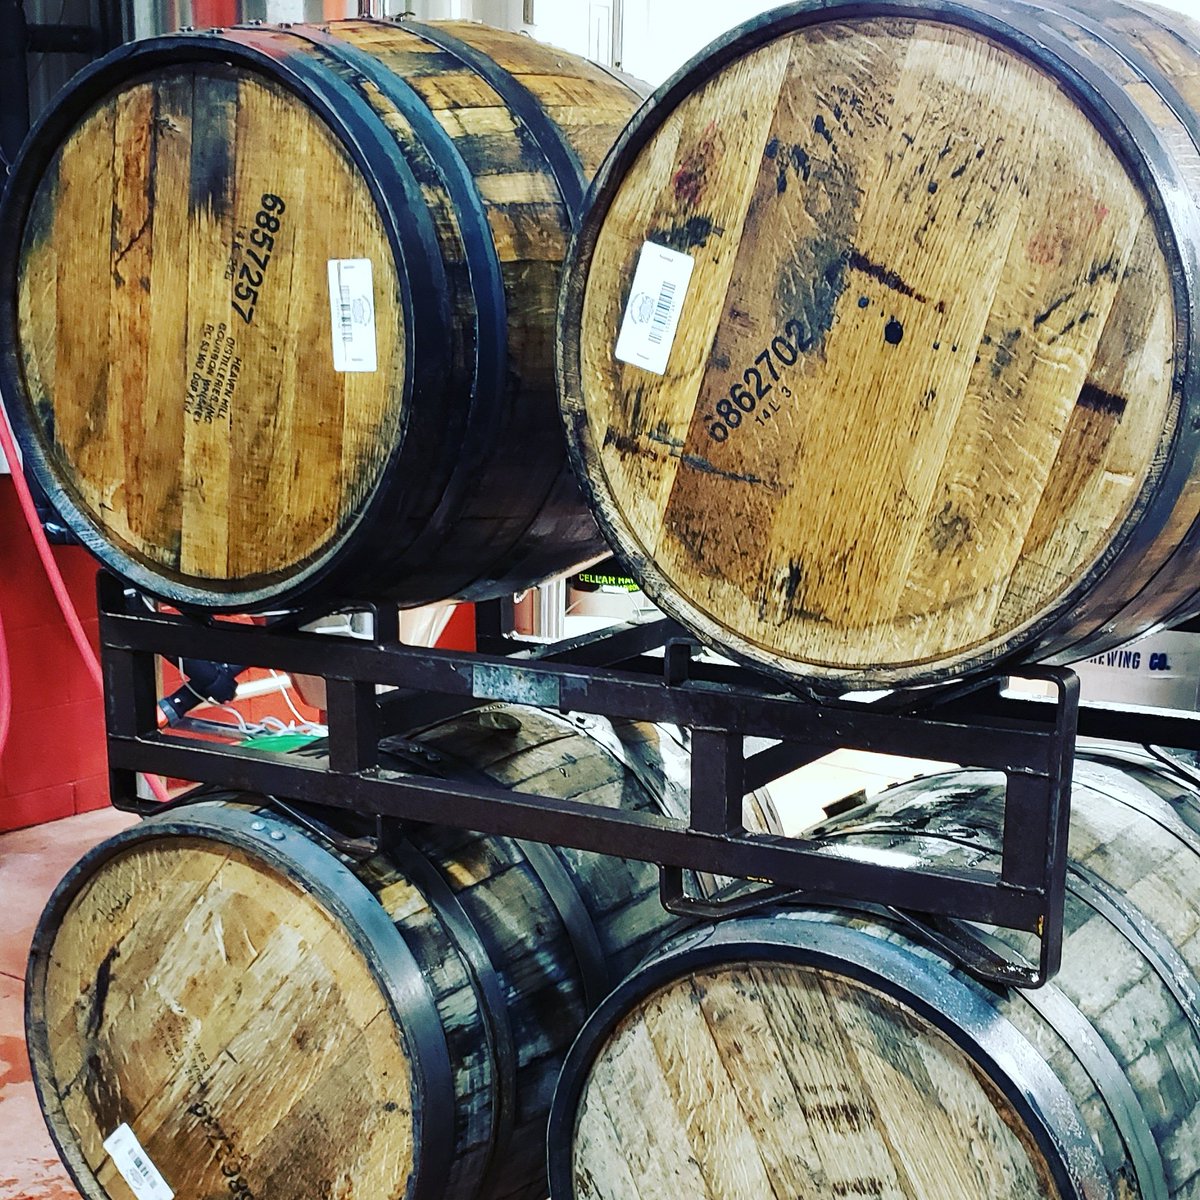 Just finished moving our Bourbon Barrel Aged Stout and we have 8 Heaven Hill Bourbon Barrels available for sale. $115 each. Call 440-466-3485 to purchase. #bourbonbarrel #bourbonbarrelstout #craftbeer #drinkbeermadehere #drinkbeerbornhere #heavenhill #debonne